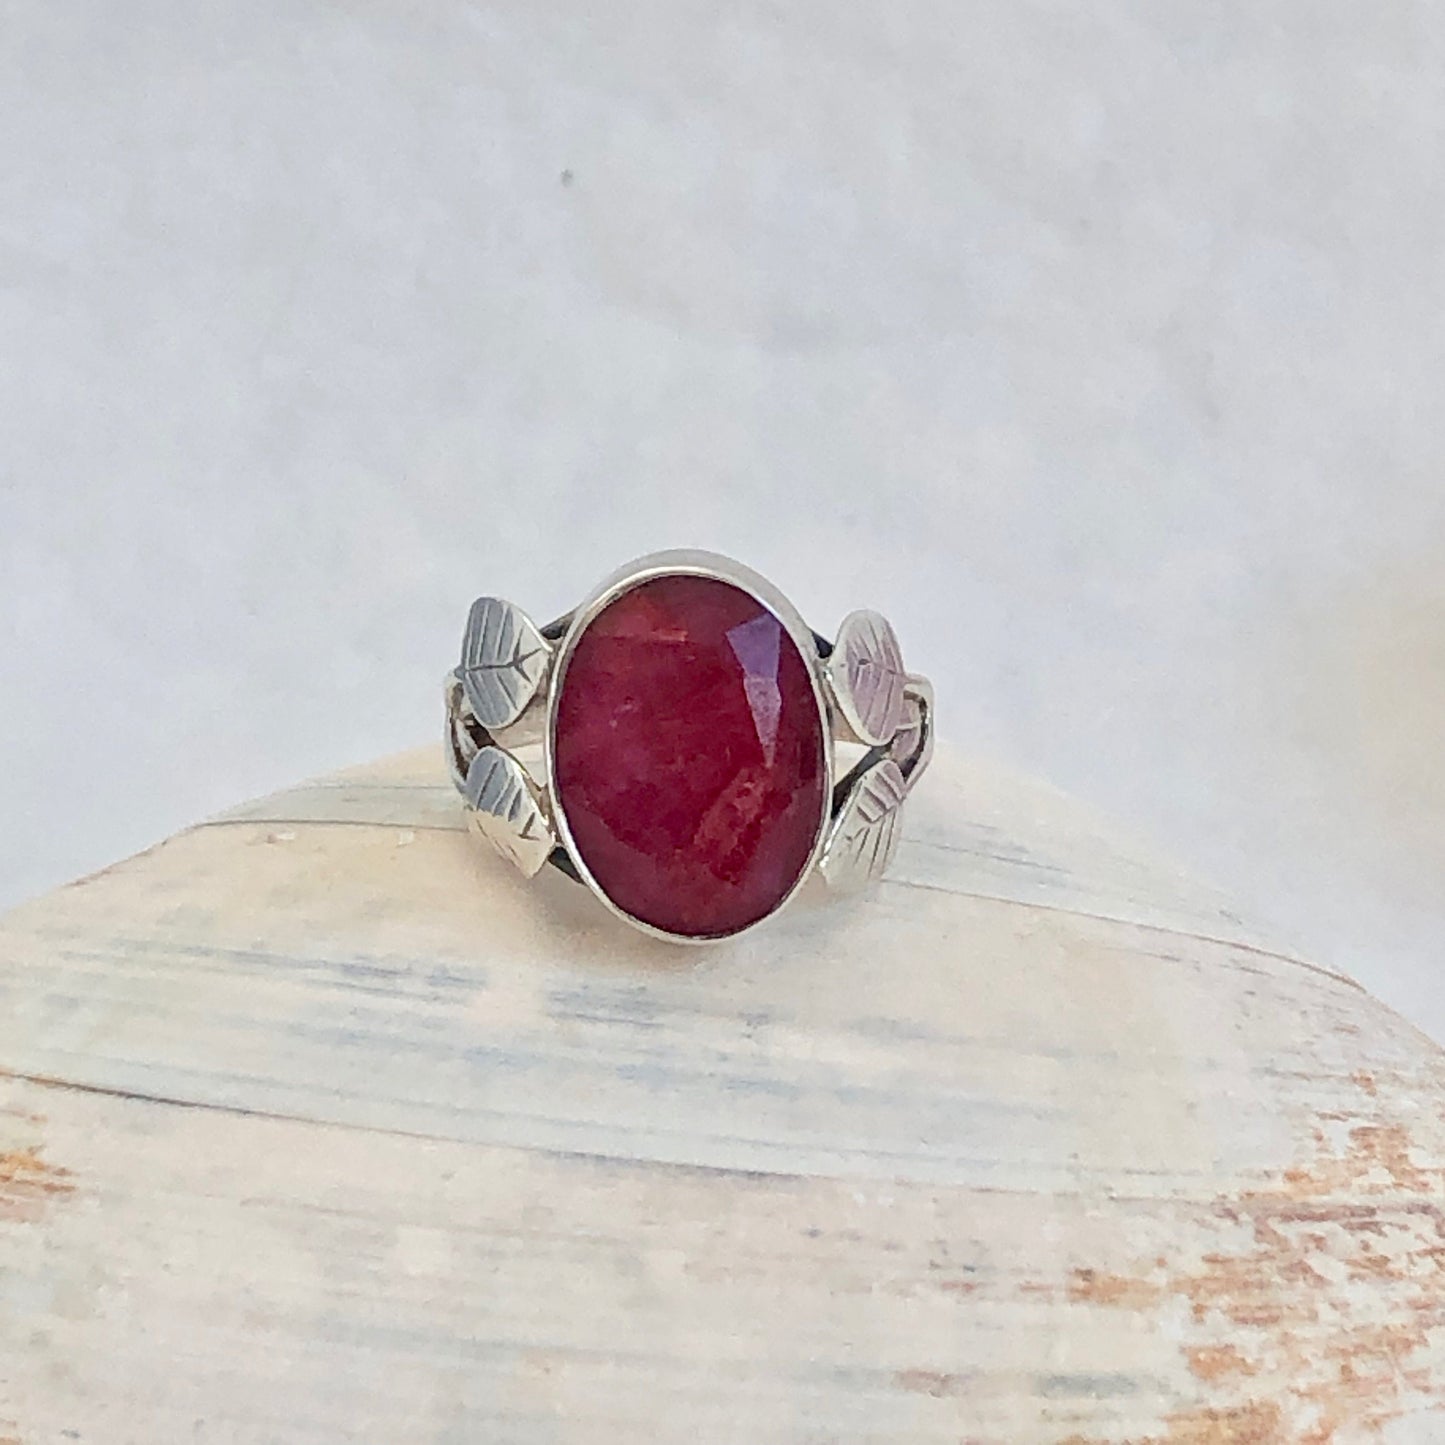 Handmade Indian ruby and sterling silver size 5 3/4  ring